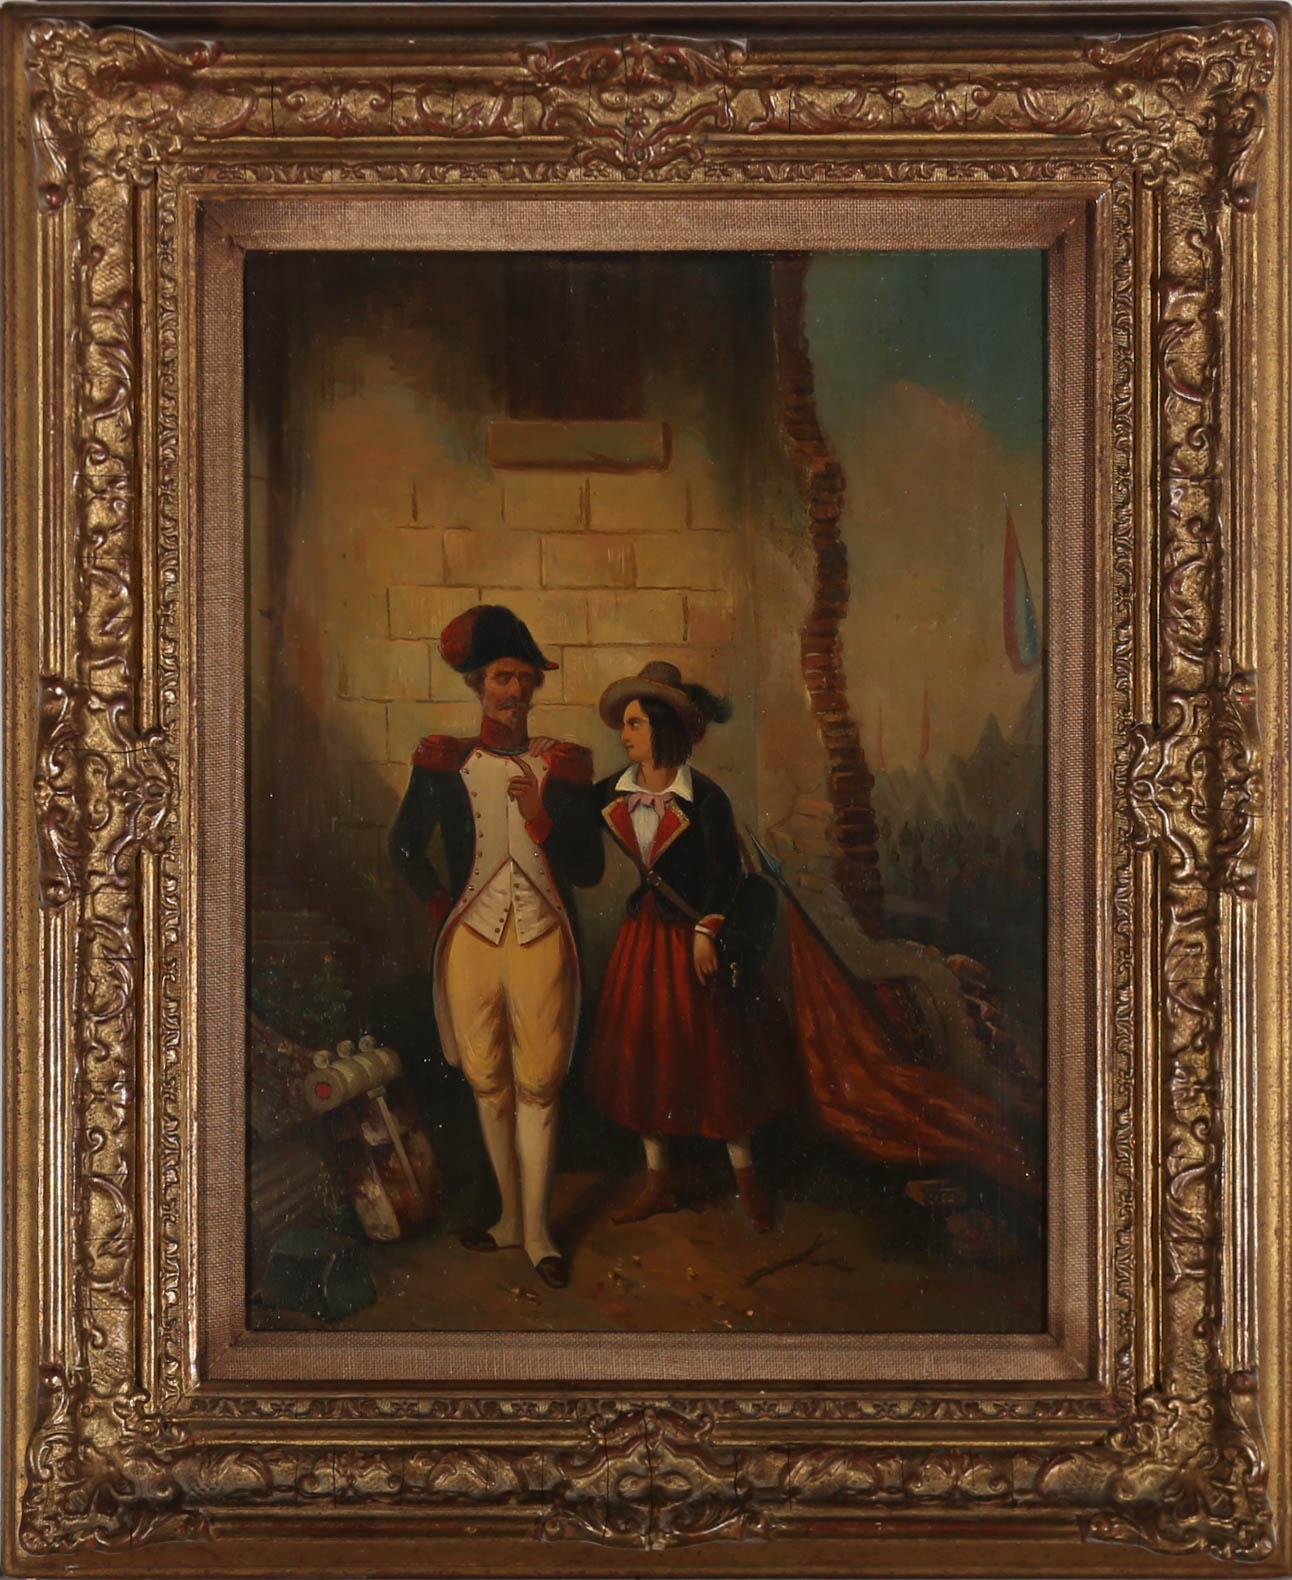 A very fine 19th Century French School oil, depicting a moment from the French Civil War in 1793. The scene shows a French general, meeting in secret with a woman, behind the ruins of a building. The woman places her hand on the man's shoulder and